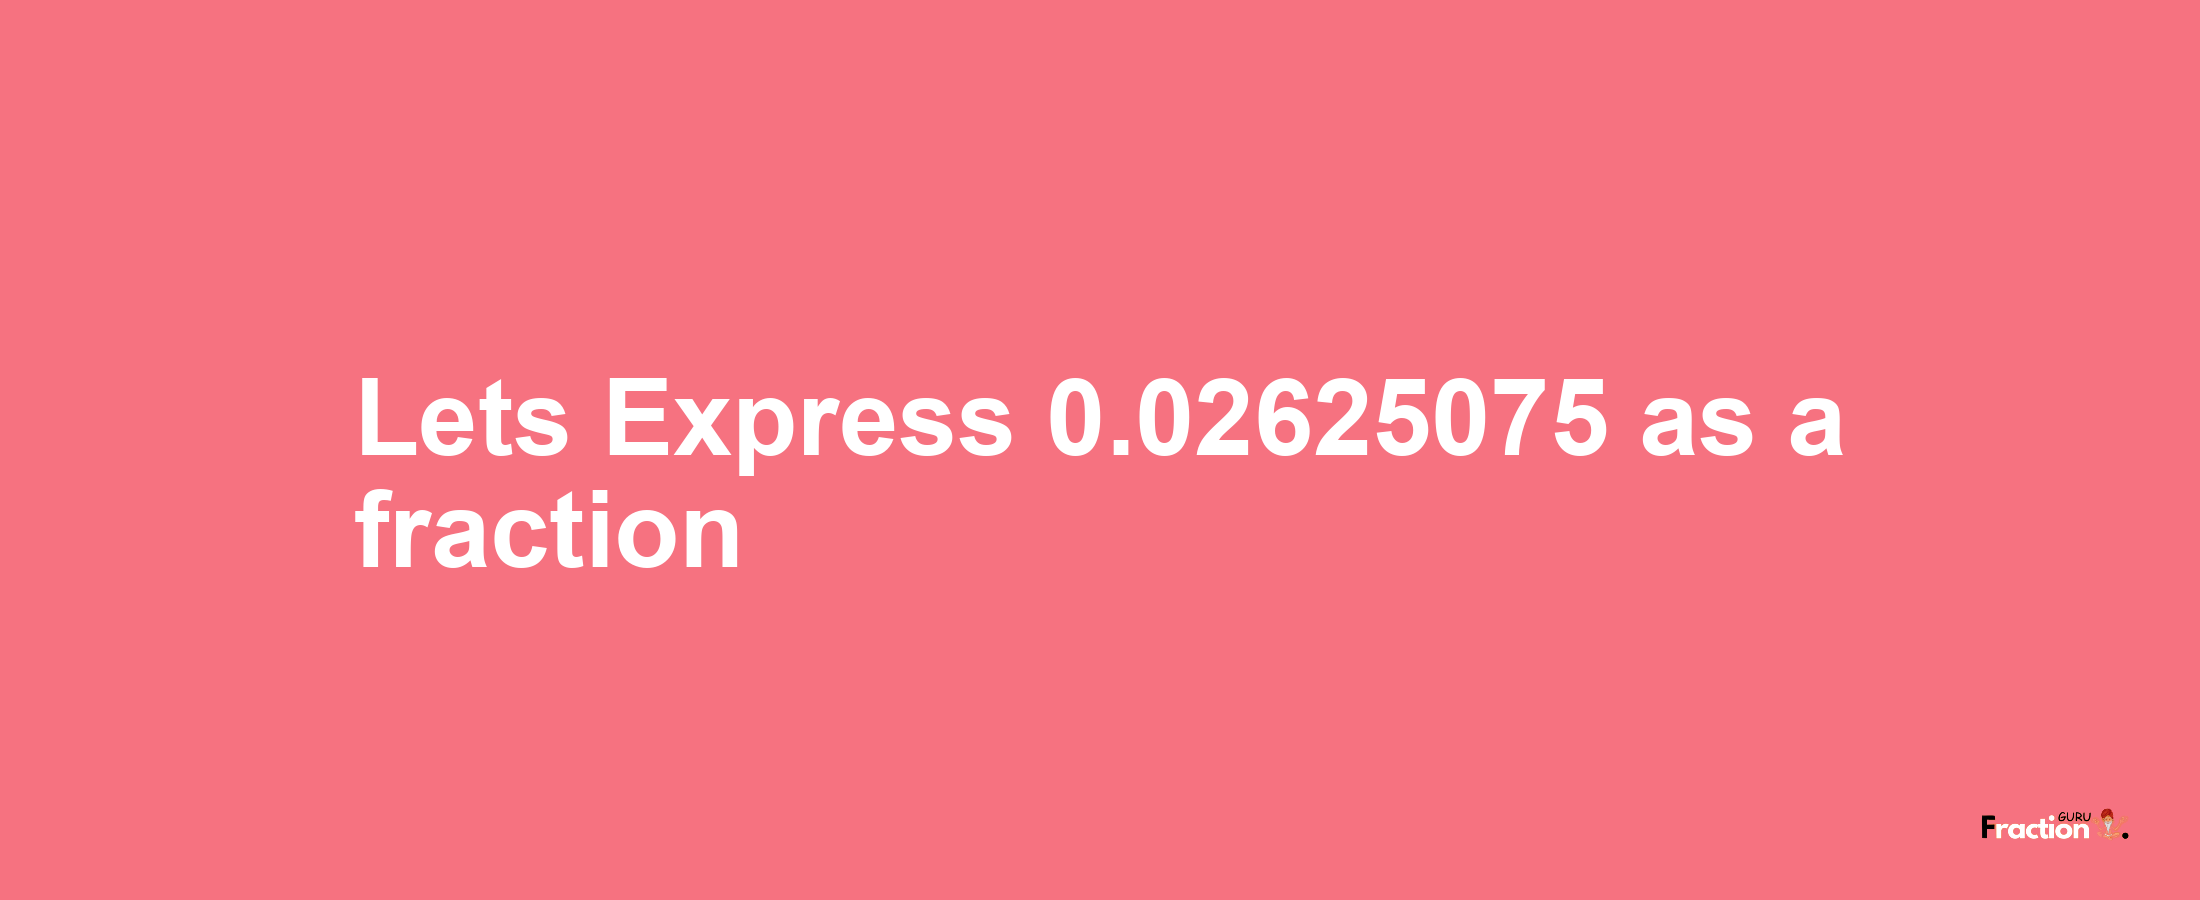 Lets Express 0.02625075 as afraction